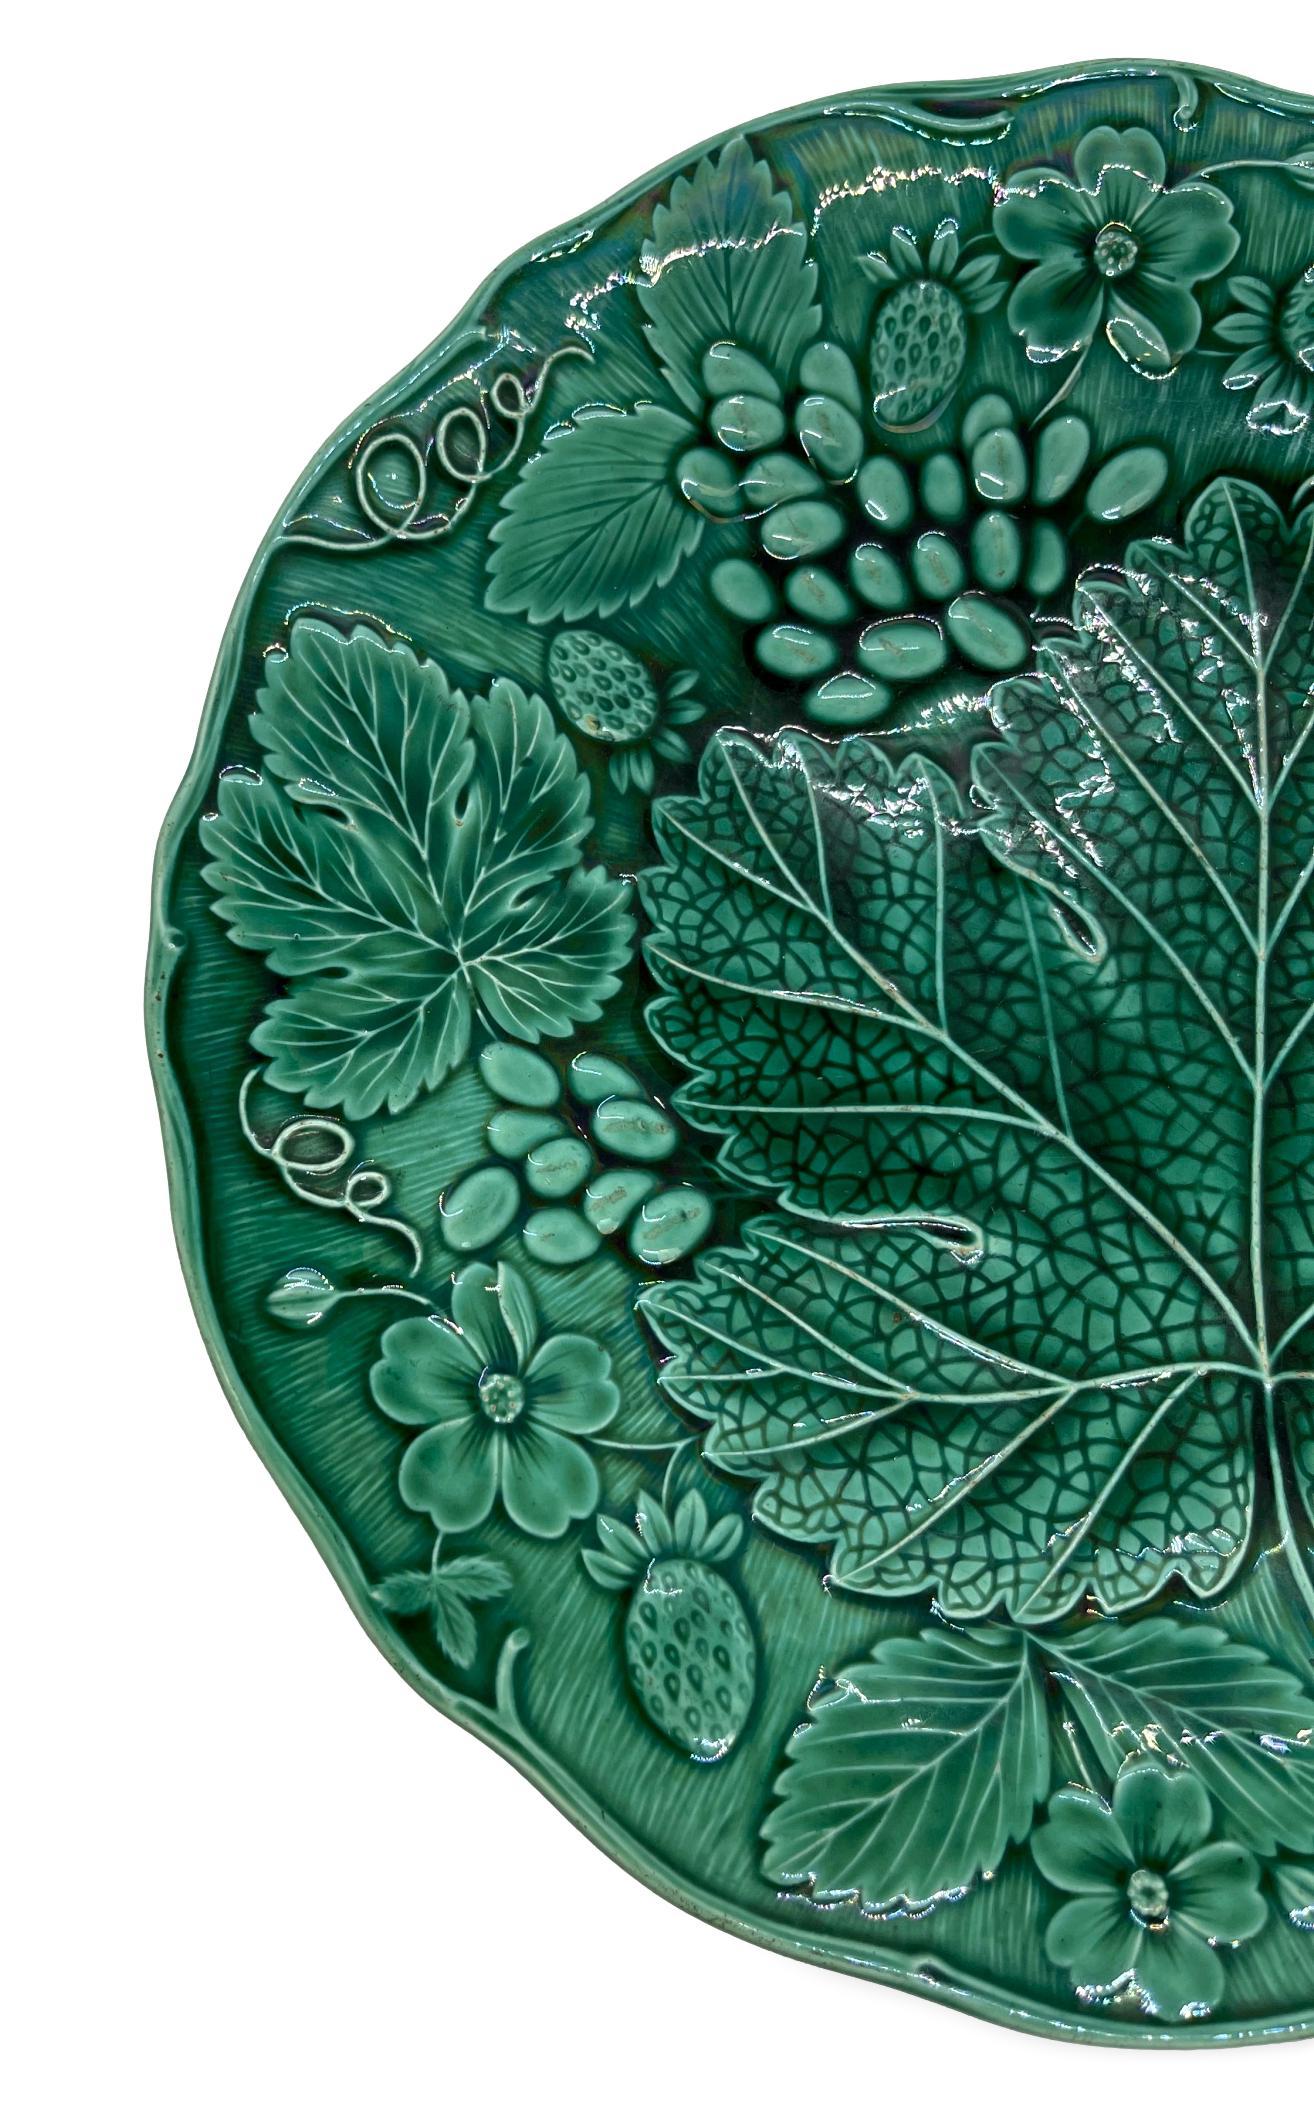 Green Majolica strawberry dessert plate, English, molded with strawberries and strawberry leaves, English, ca. 1880.